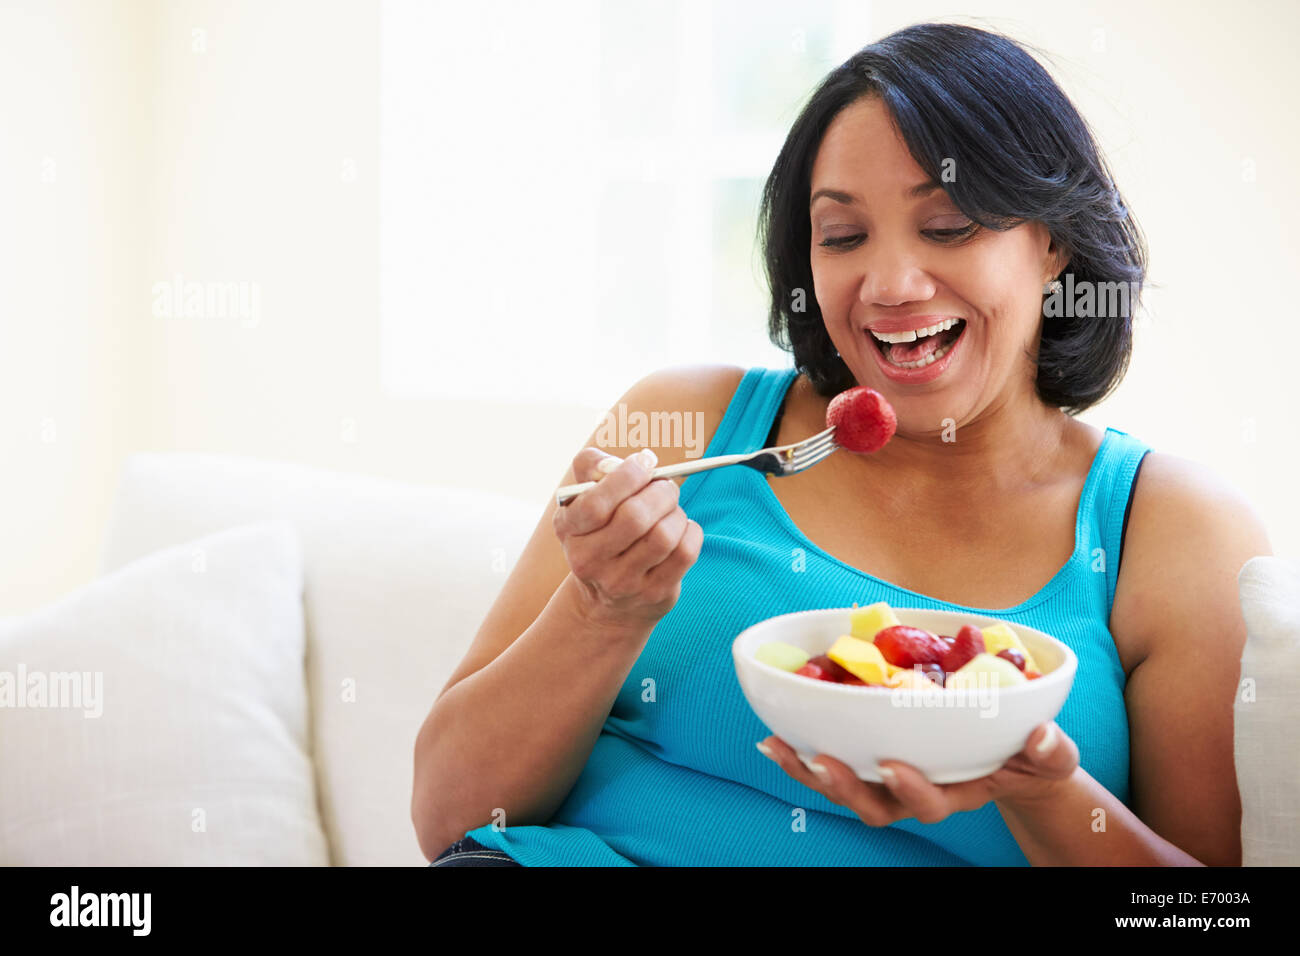 Overweight Woman Sitting On Sofa Eating Bowl Of Fresh Fruit Stock Photo